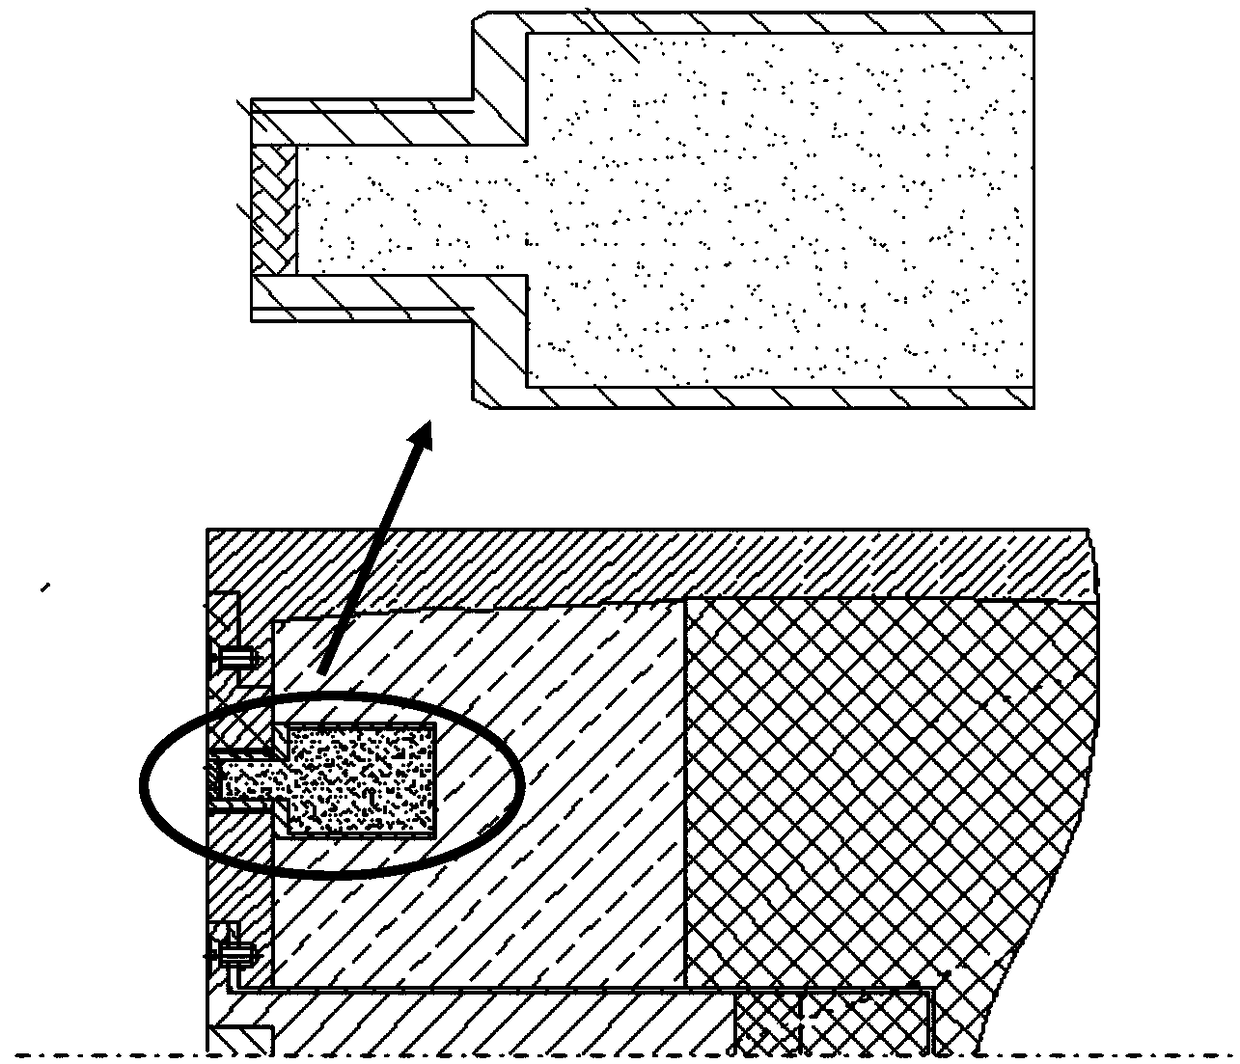 Constant-temperature melting pressure release slow-release system of missile warhead